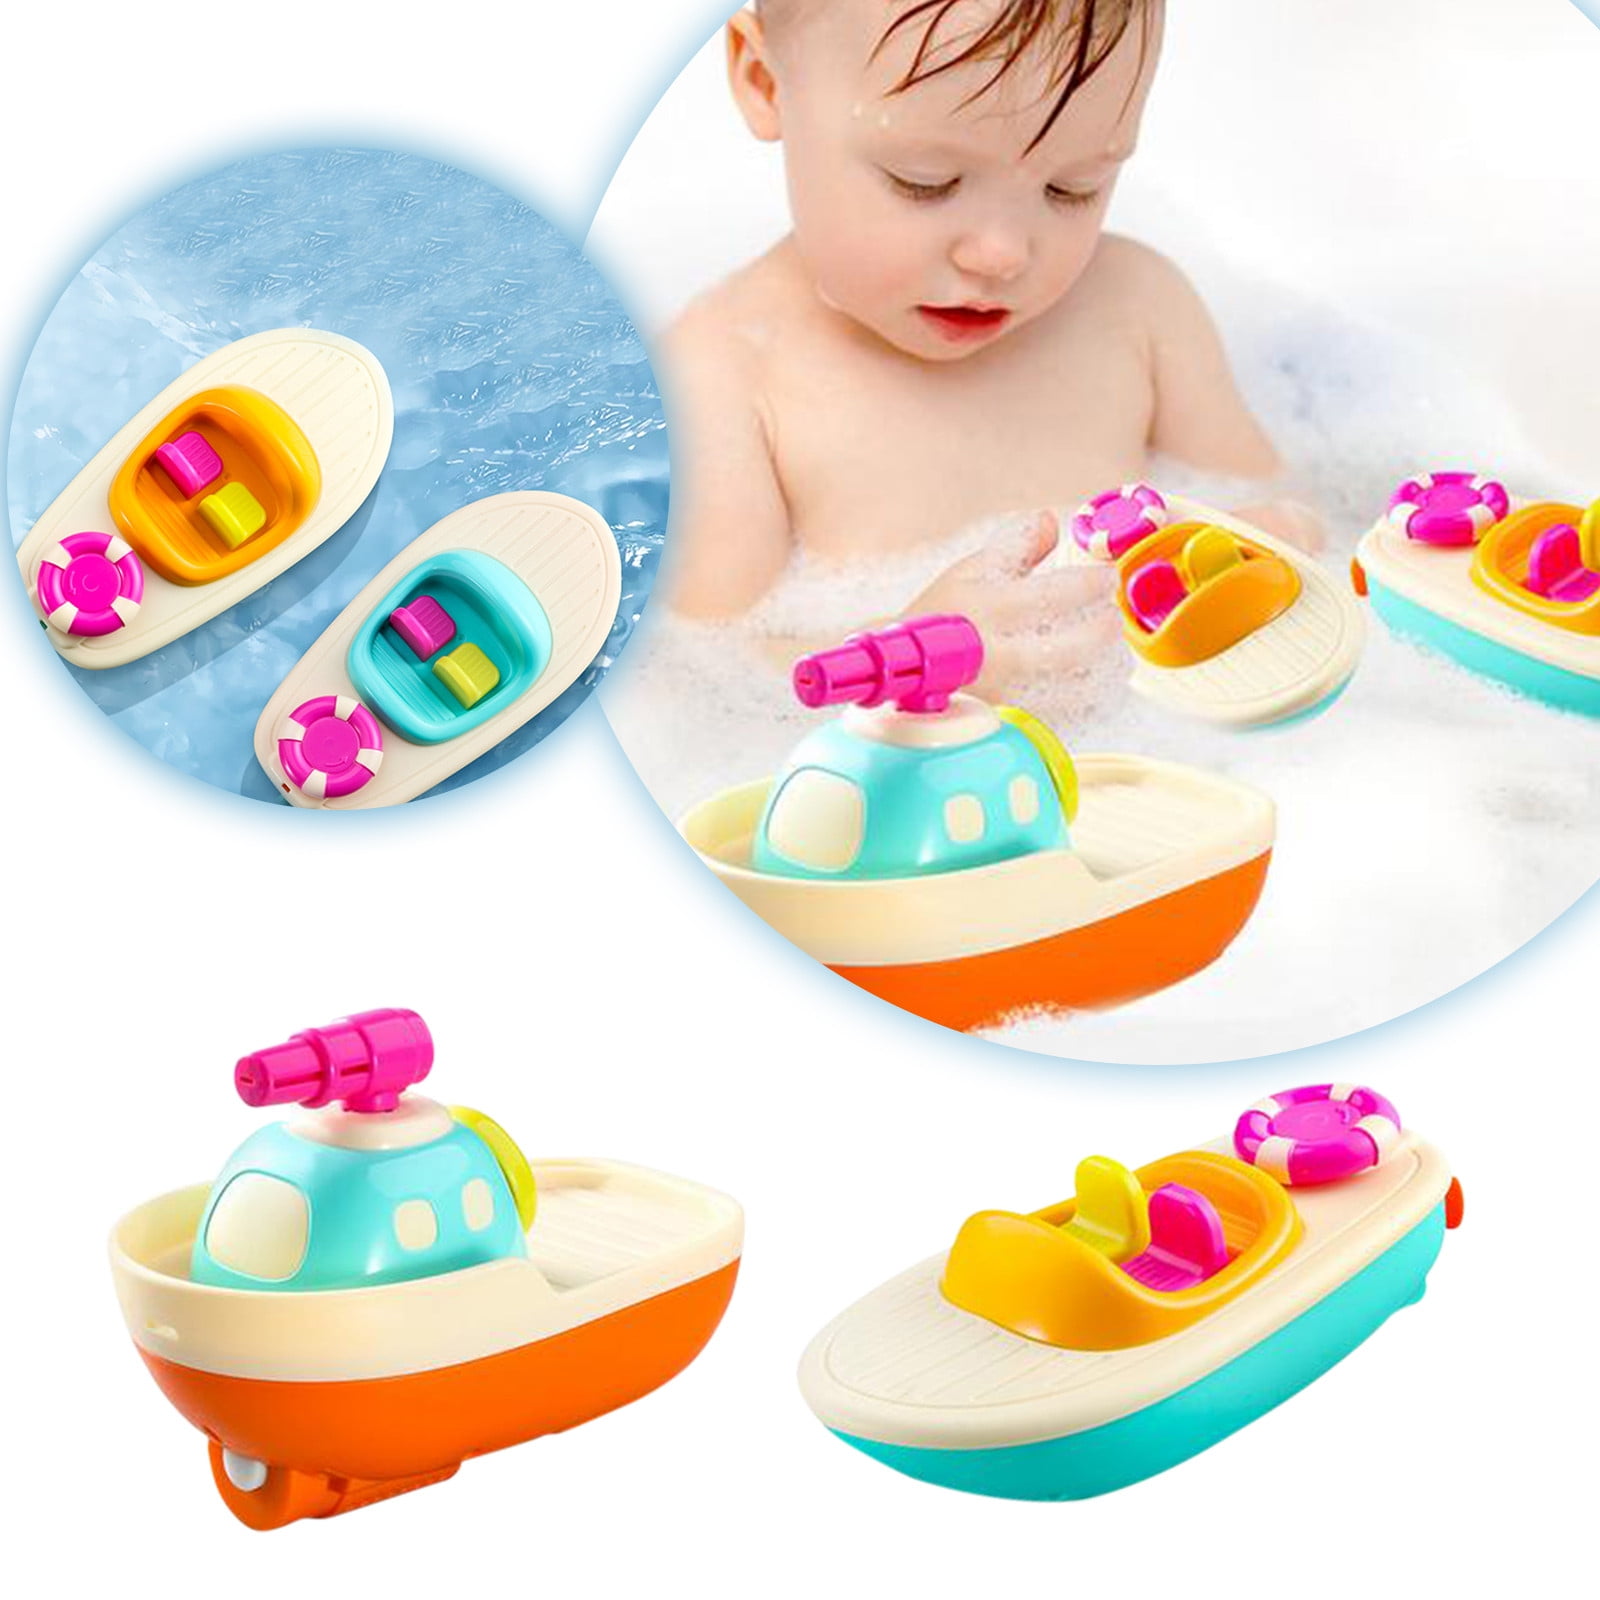 Bath Toys Floating Boat Train with Silicone Bath Toys, 9pcs Mold Free No Mold Baby Bath Toys for Kids Ages 1-3, Bathtub Bath Toys for Toddlers 1-3